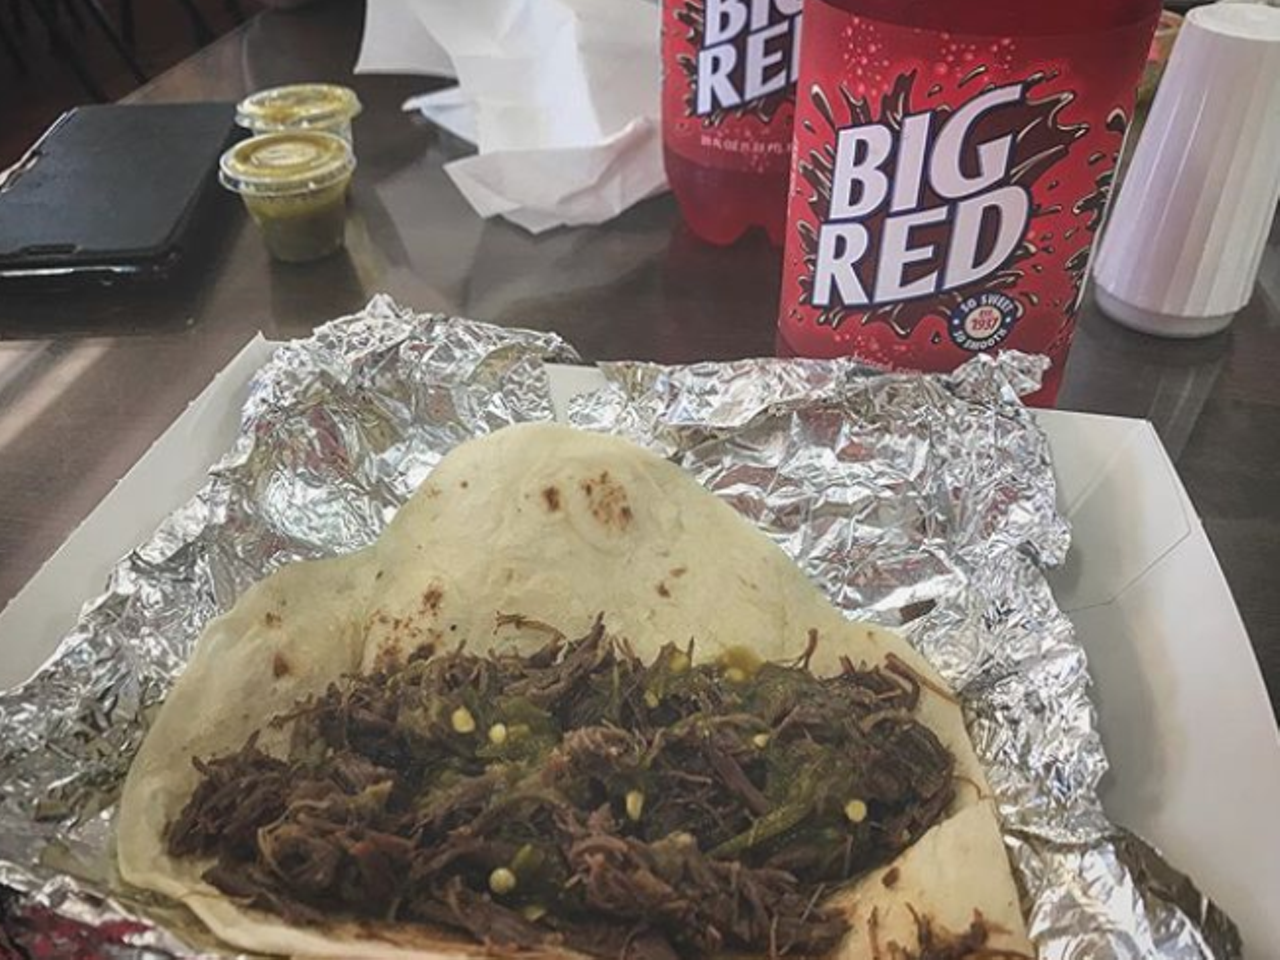 Tellez Tamales & Barbacoa
1737 S General McMullen Dr., (210) 433-1367, facebook.com
https://www.facebook.com/Tellez-Tamales-Barbacoa-115721145123658/
If you’re not lining up for Tellez tamales  on Christmas Eve, are you even a true San Antonian? We’ll give you a pass if you’re helping your abuela make this year’s batch.
Photo via Instagram / lexnicera